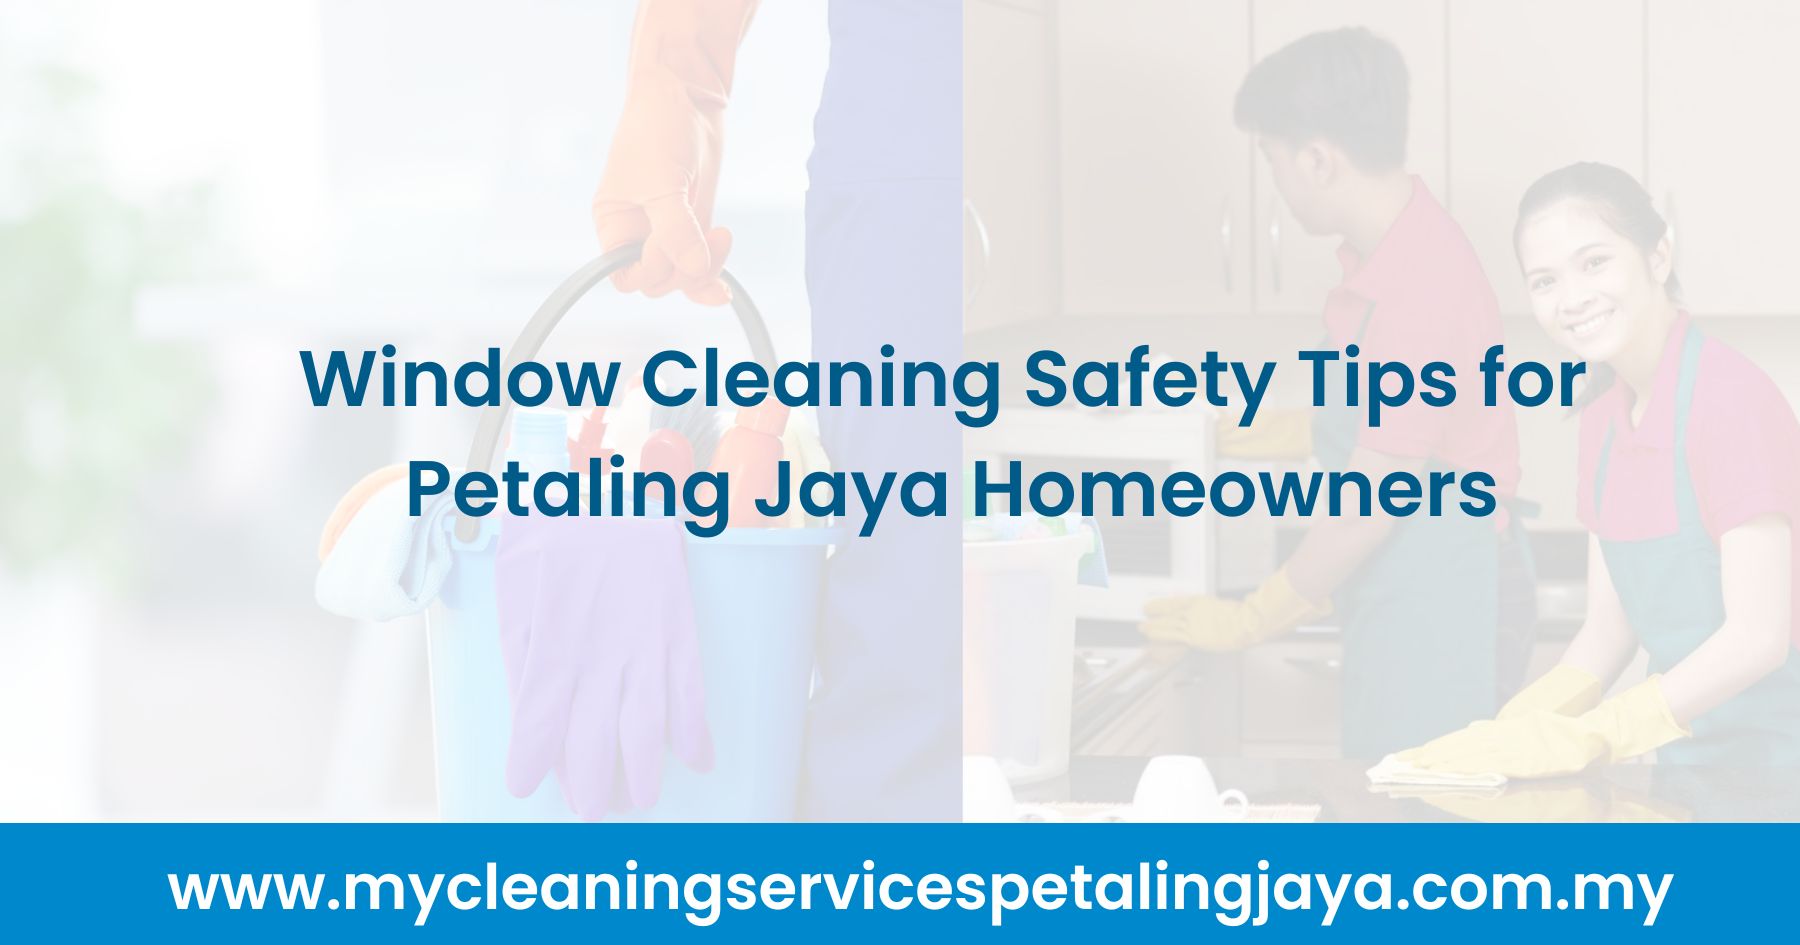 Window Cleaning Safety Tips for Petaling Jaya Homeowners